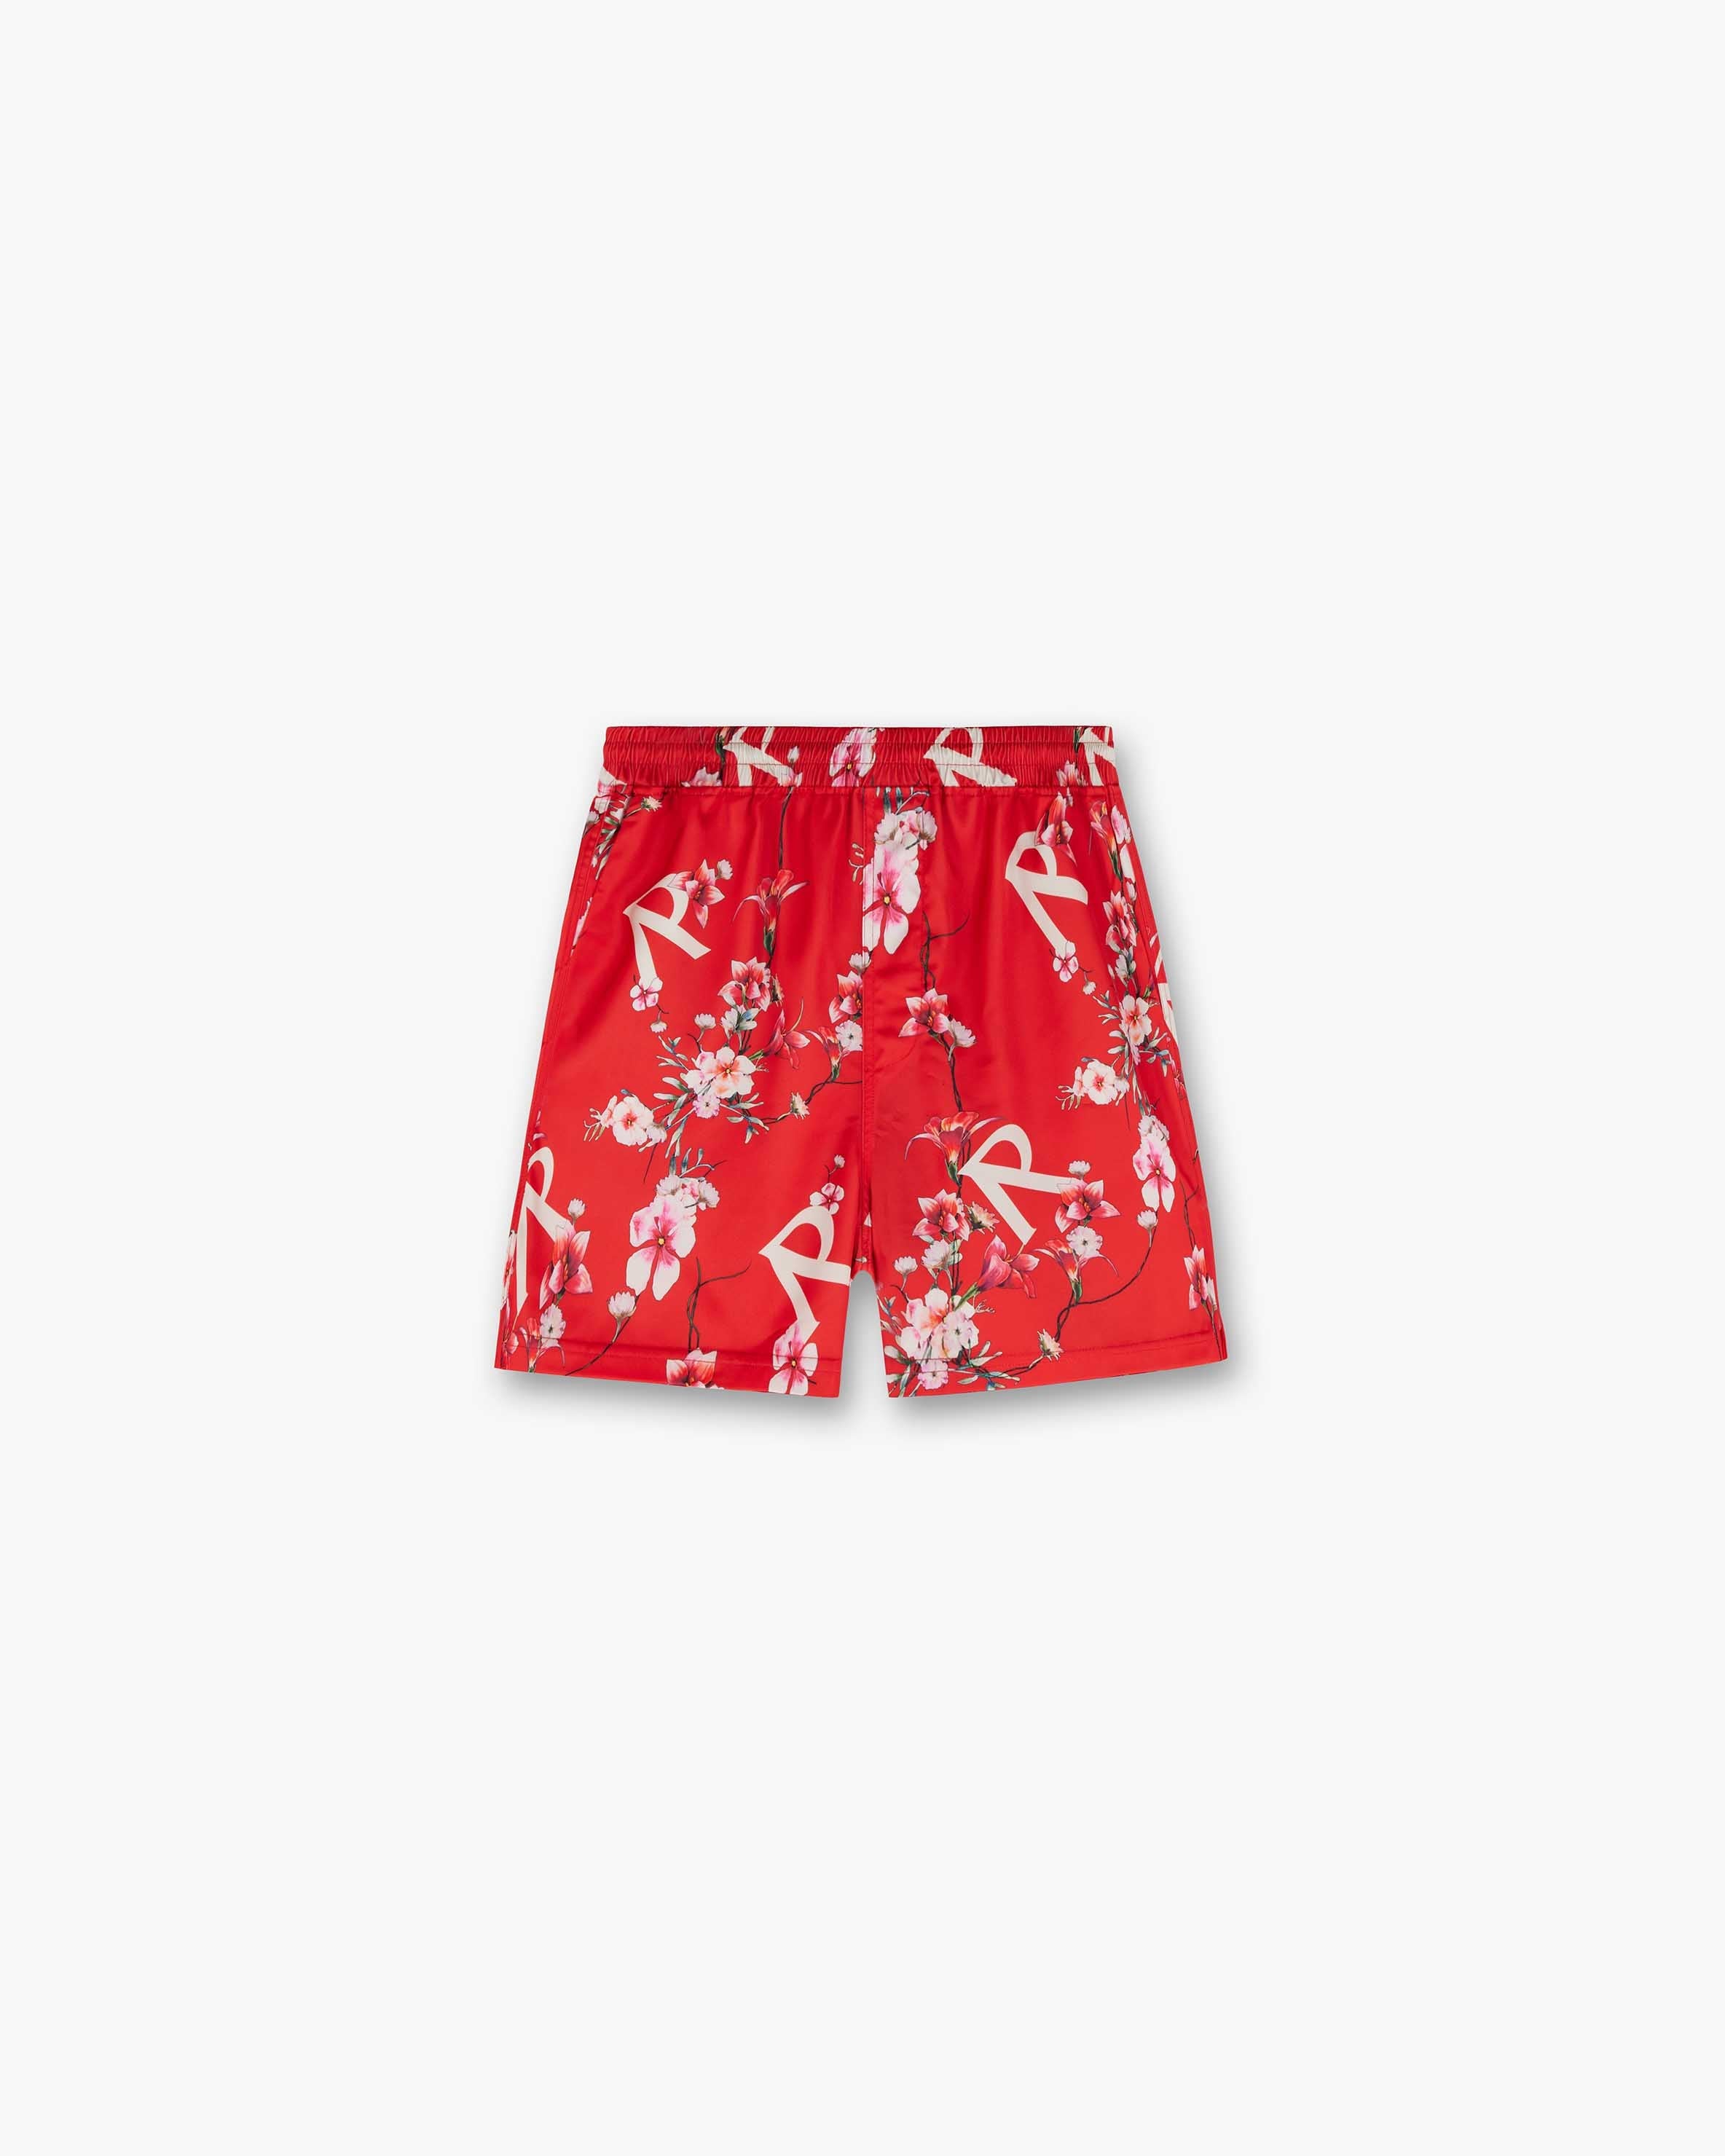 Floral Shorts | Burnt Red Shorts SS23 | Represent Clo